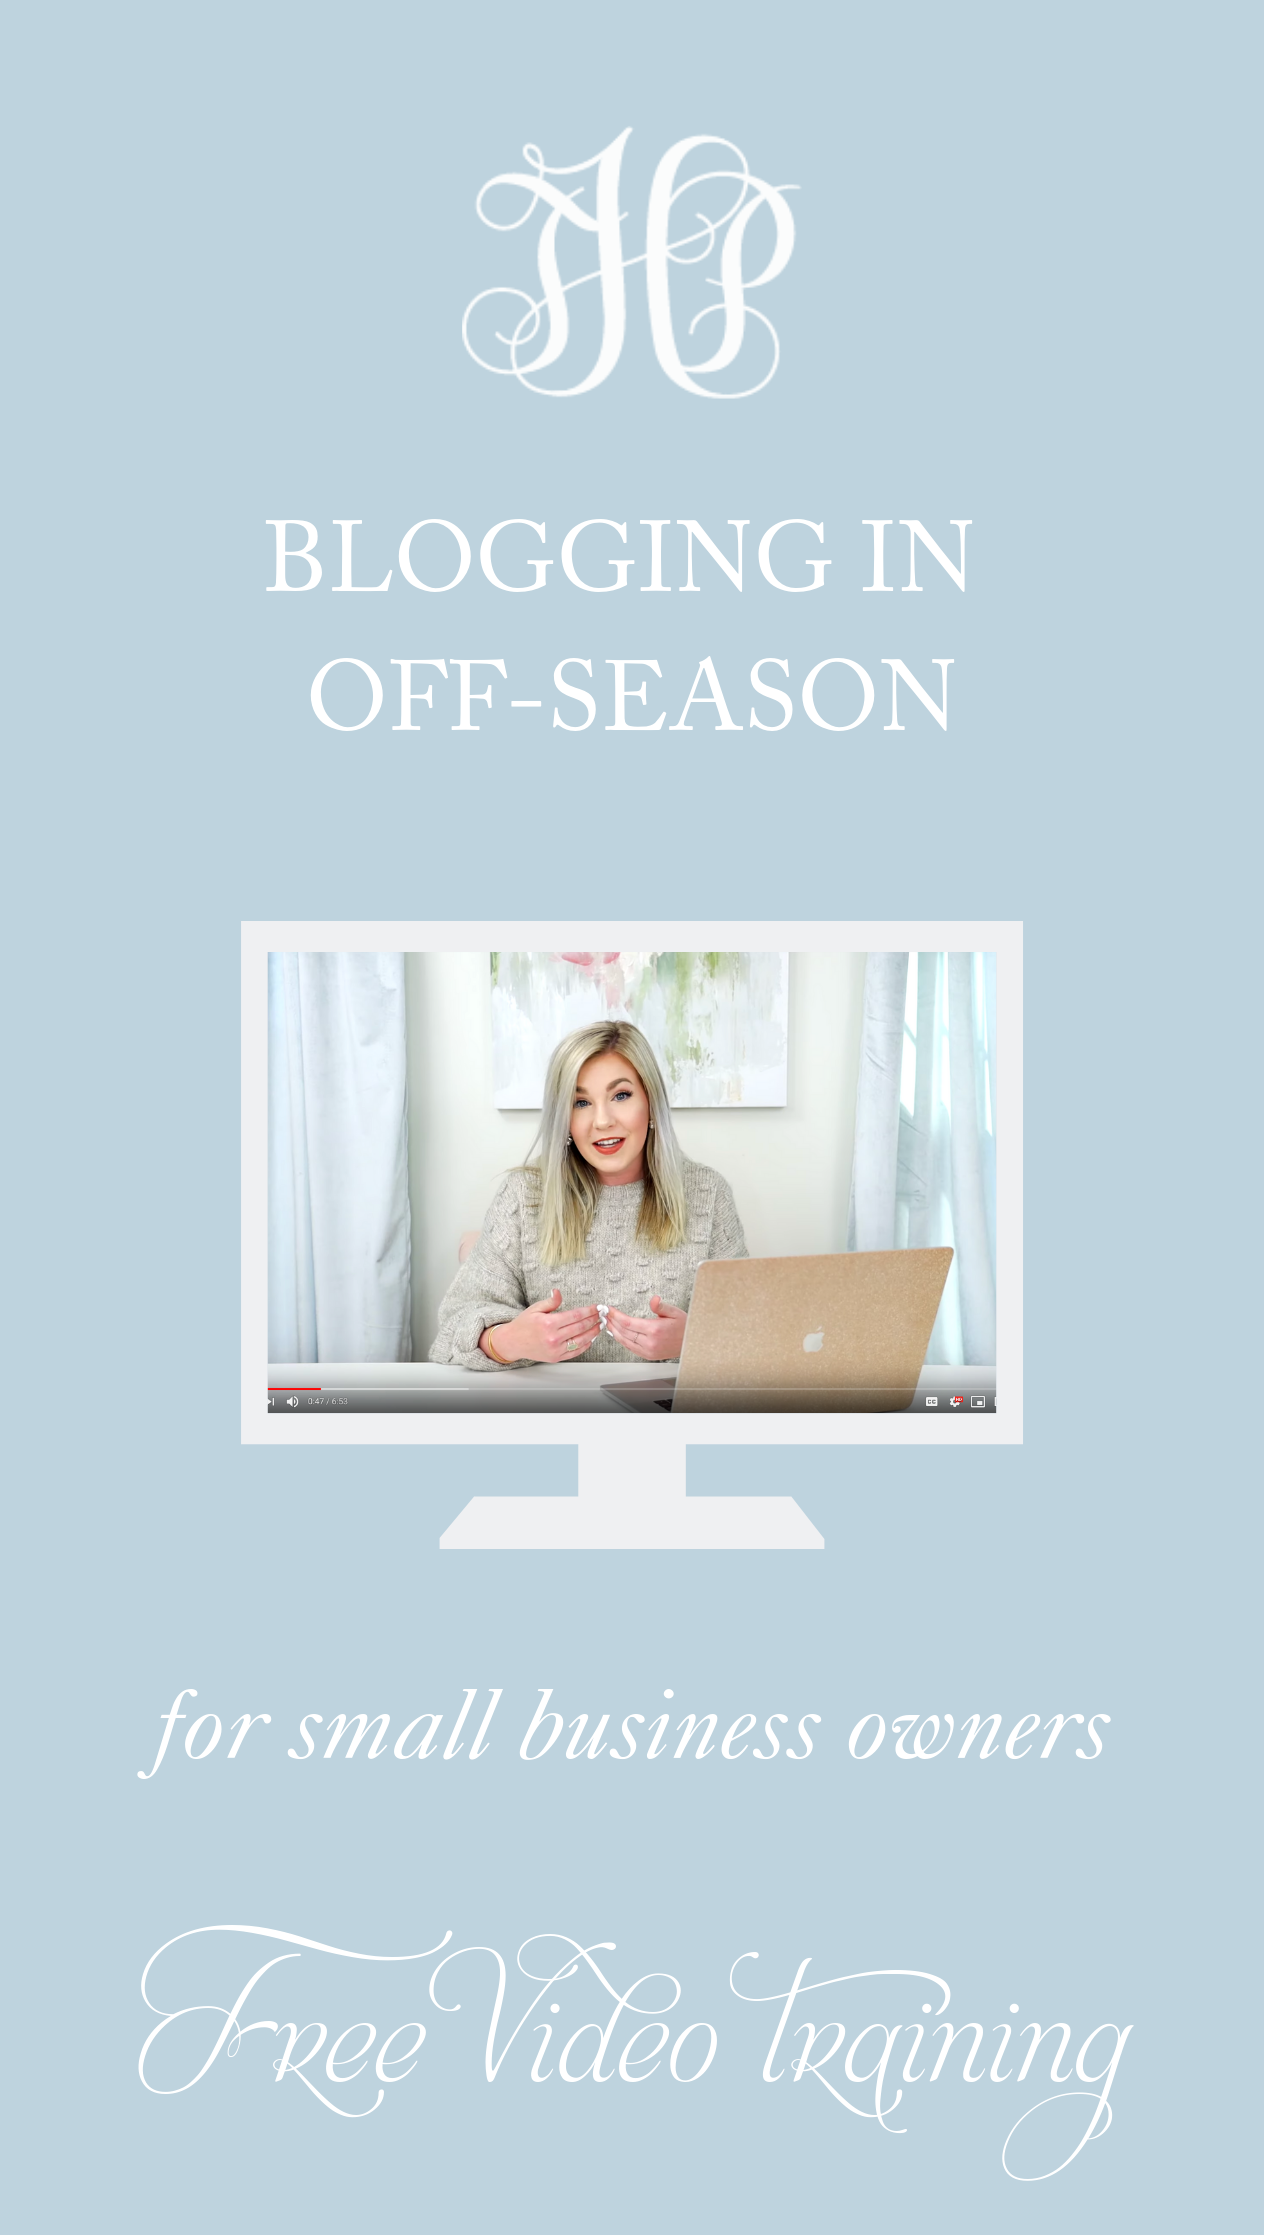 Blogging in Off-Season for Small Business Owners | Happy Hour with Hope Episode #6